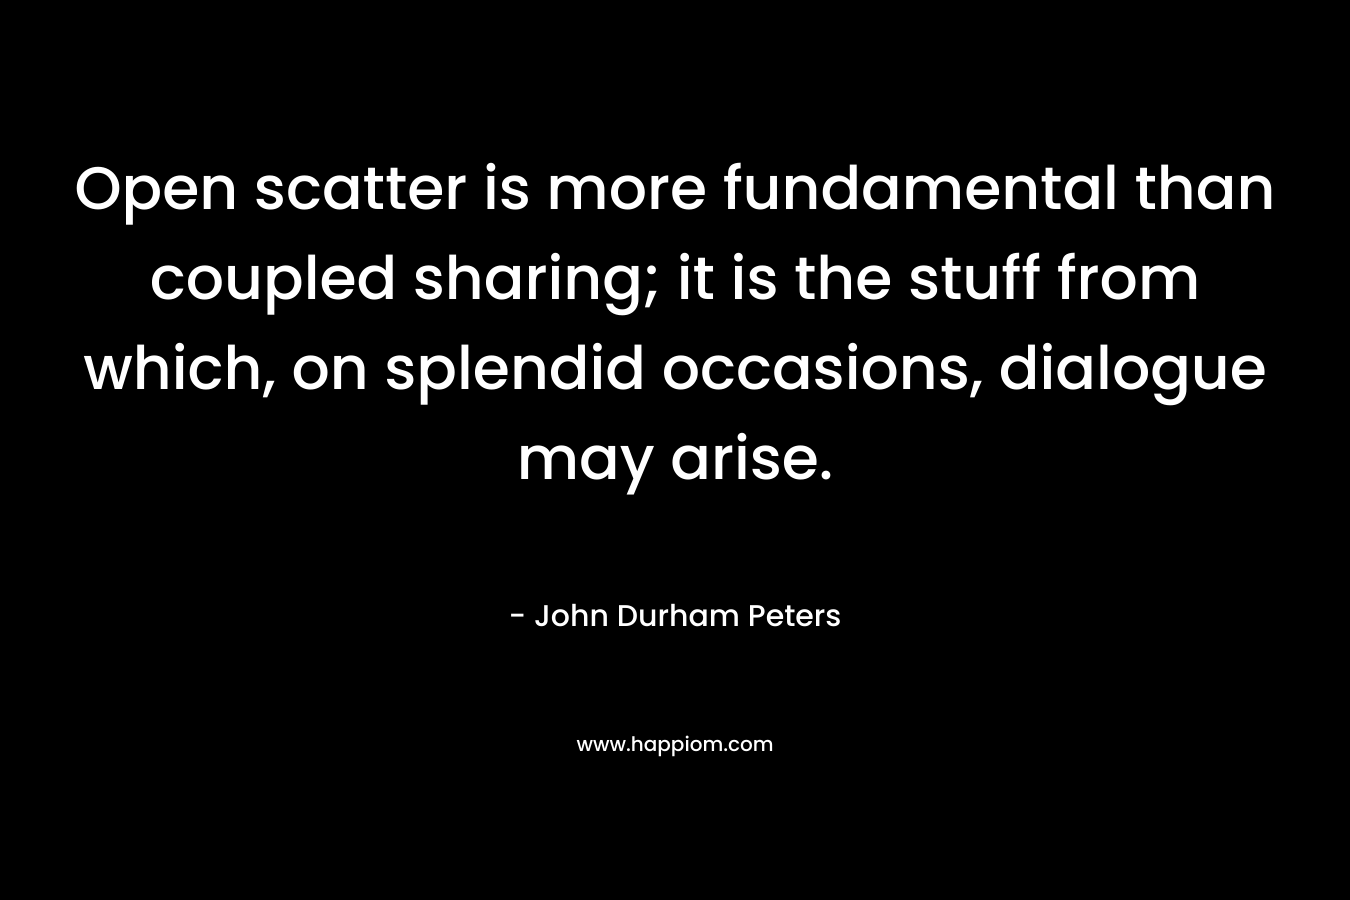 Open scatter is more fundamental than coupled sharing; it is the stuff from which, on splendid occasions, dialogue may arise. – John Durham Peters